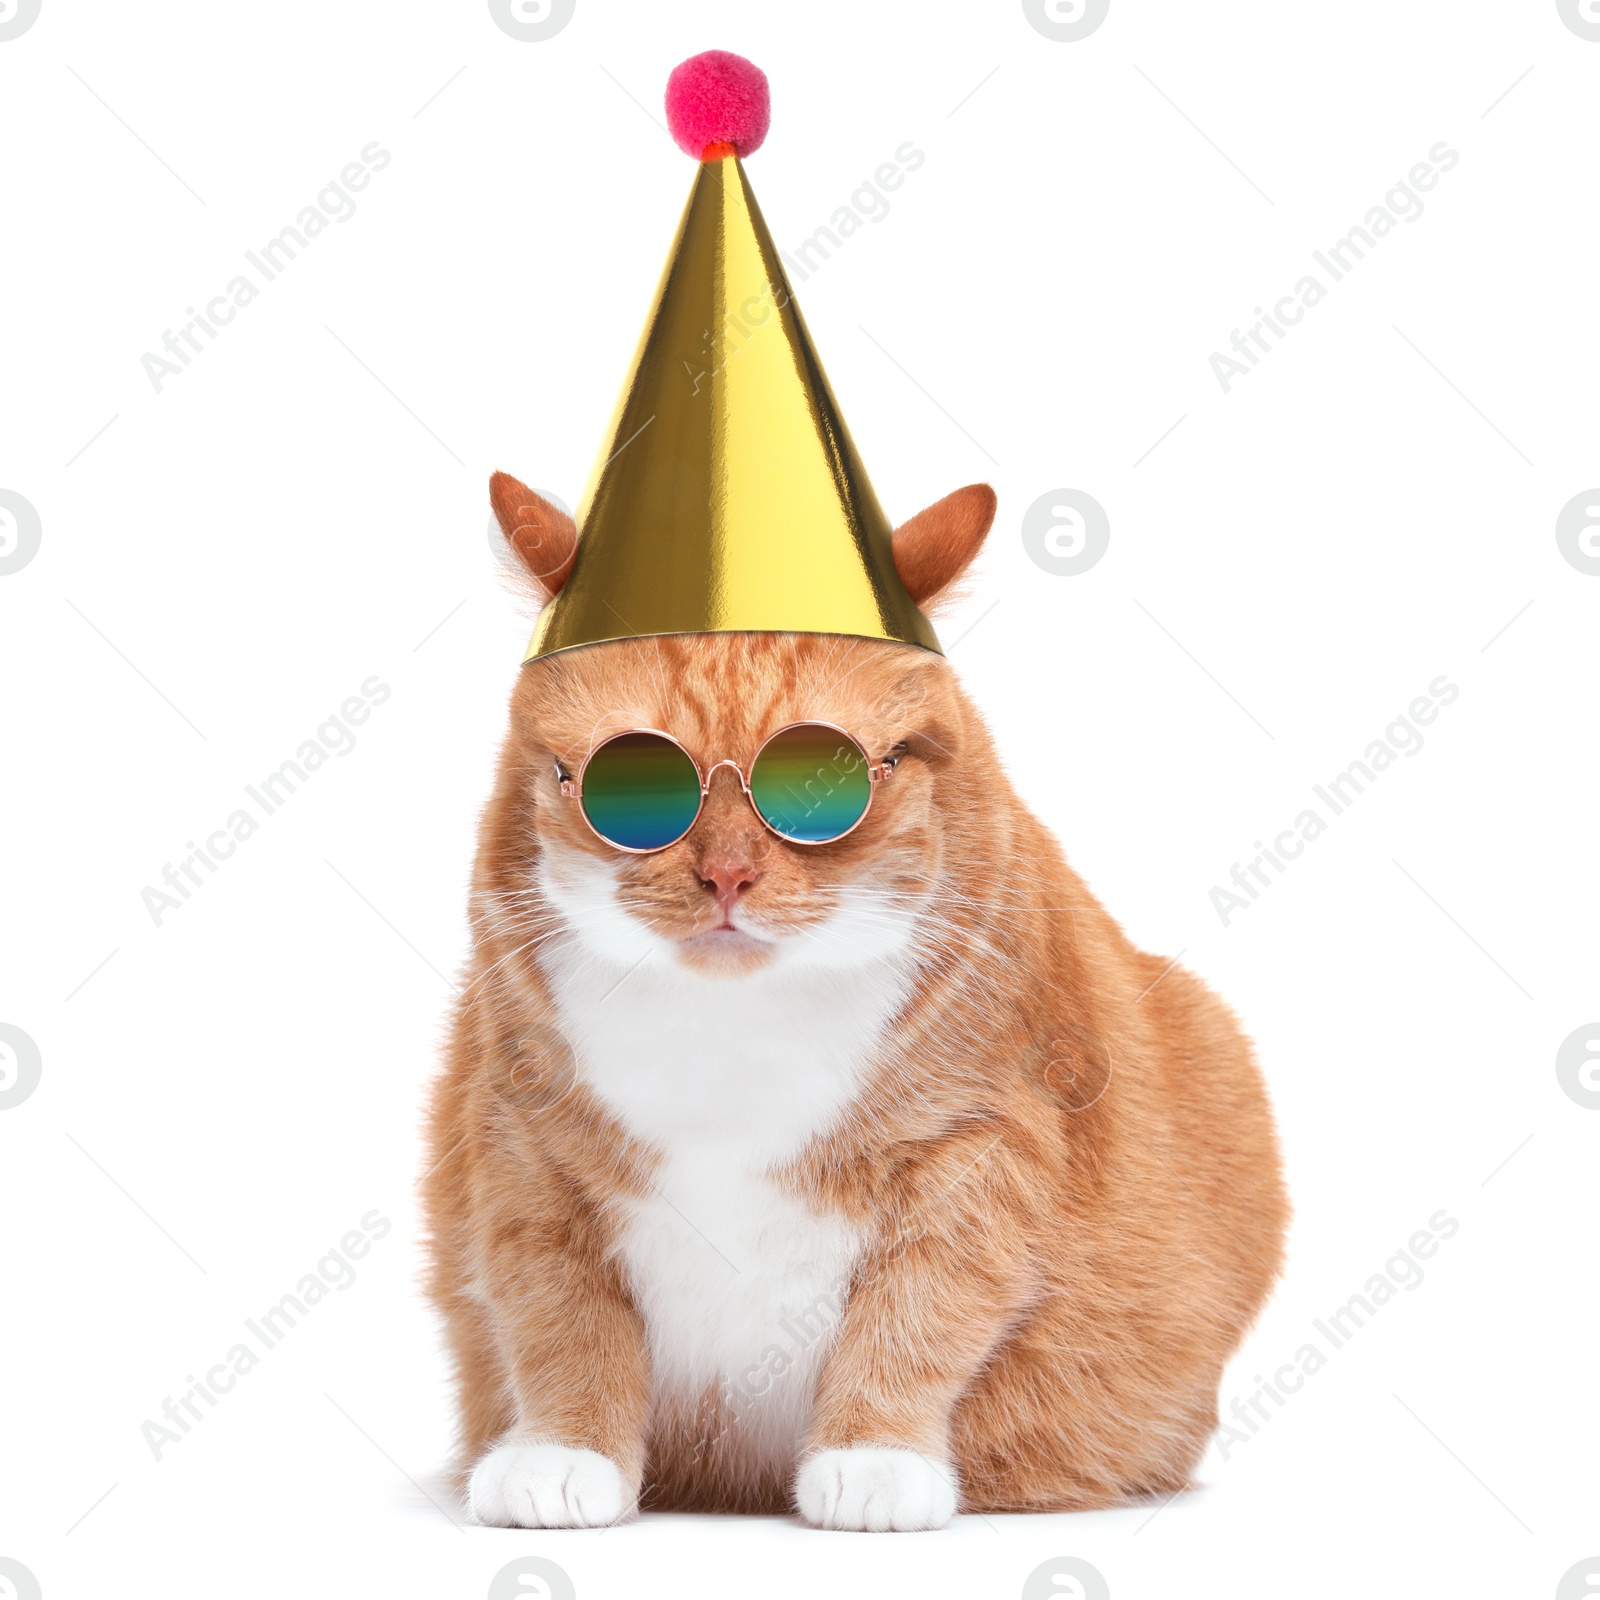 Image of Cute cat with party hat and sunglasses on white background